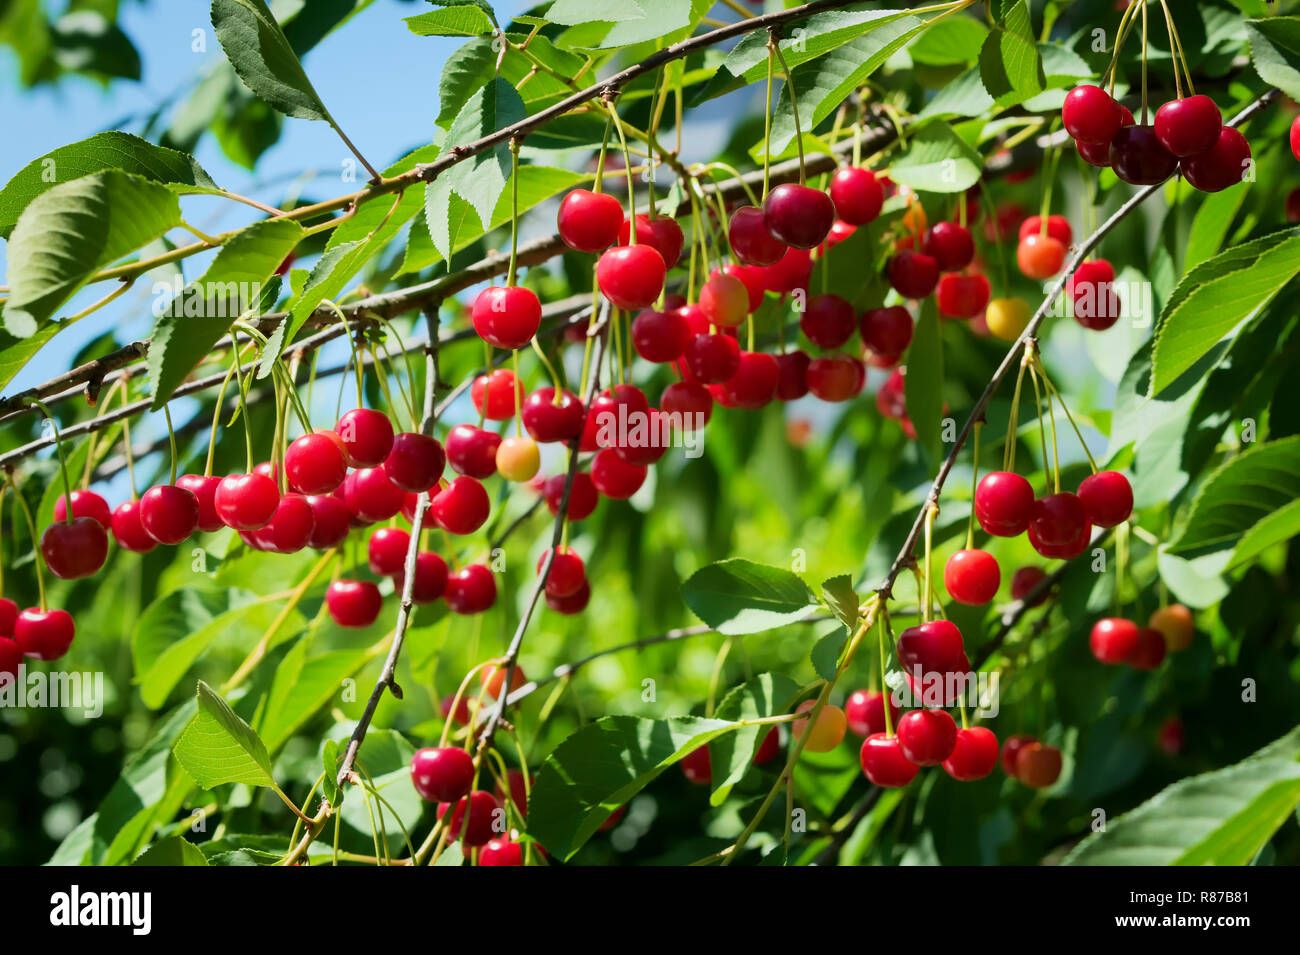 Red  sour or tart cherries growing on a cherry tree. Ripe Prunus cerasus fruits and green tree foliage. Stock Photo